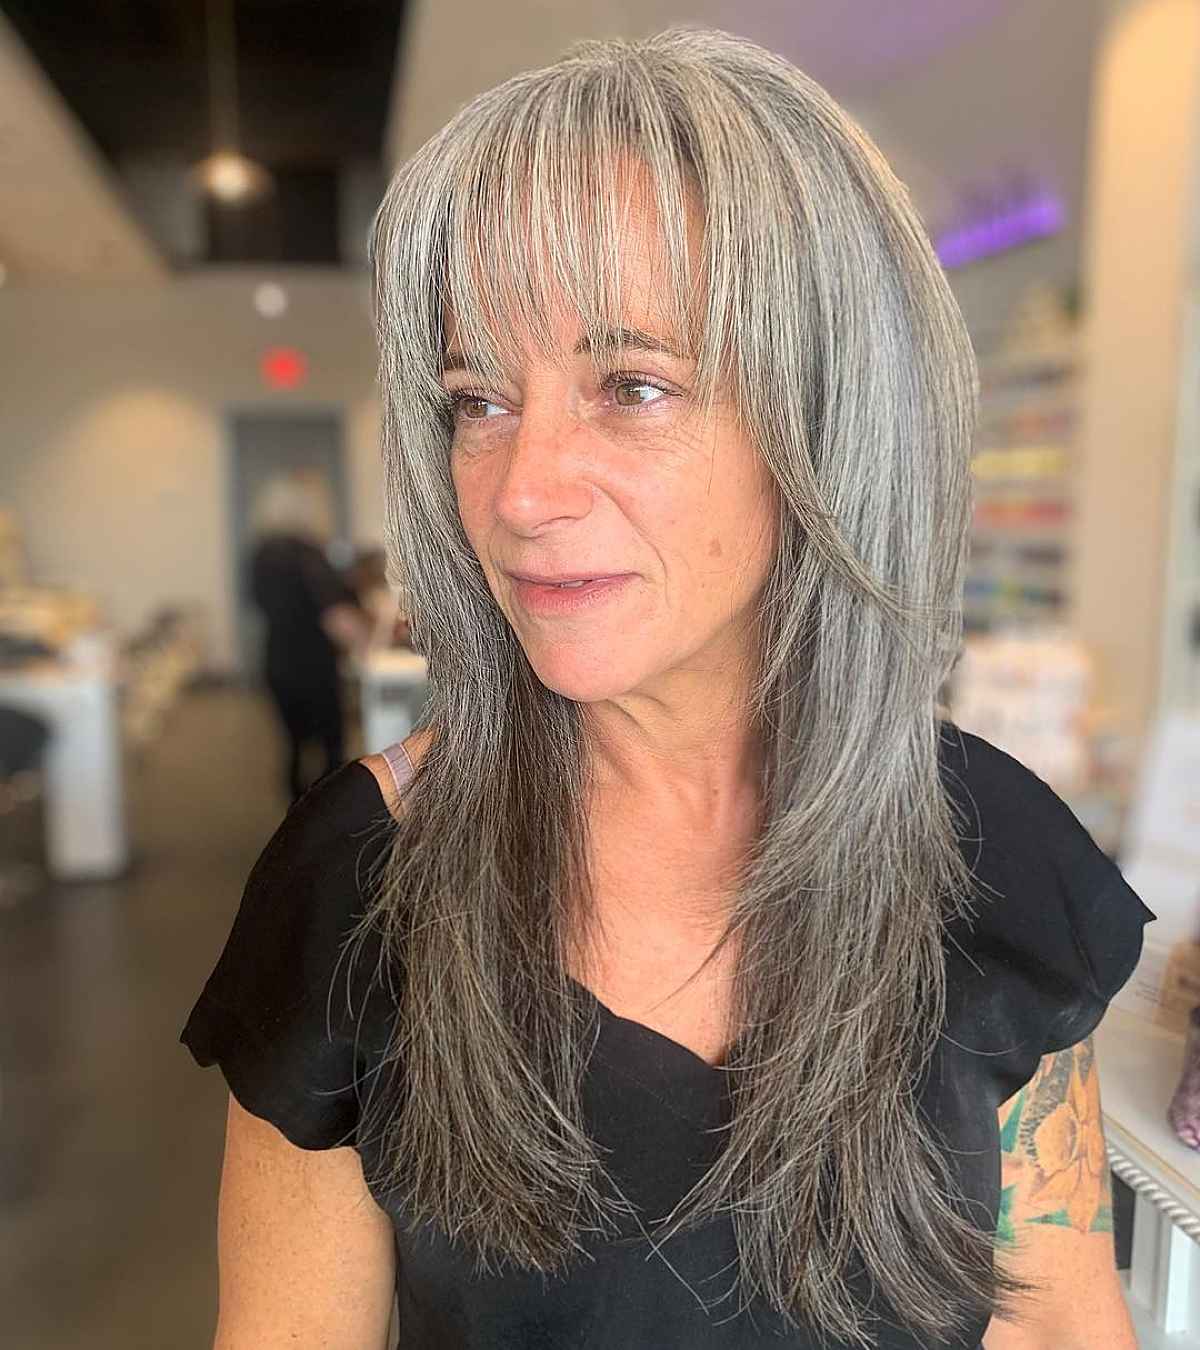 Long Shaggy Hair with Long Bangs for ladies in their 60s